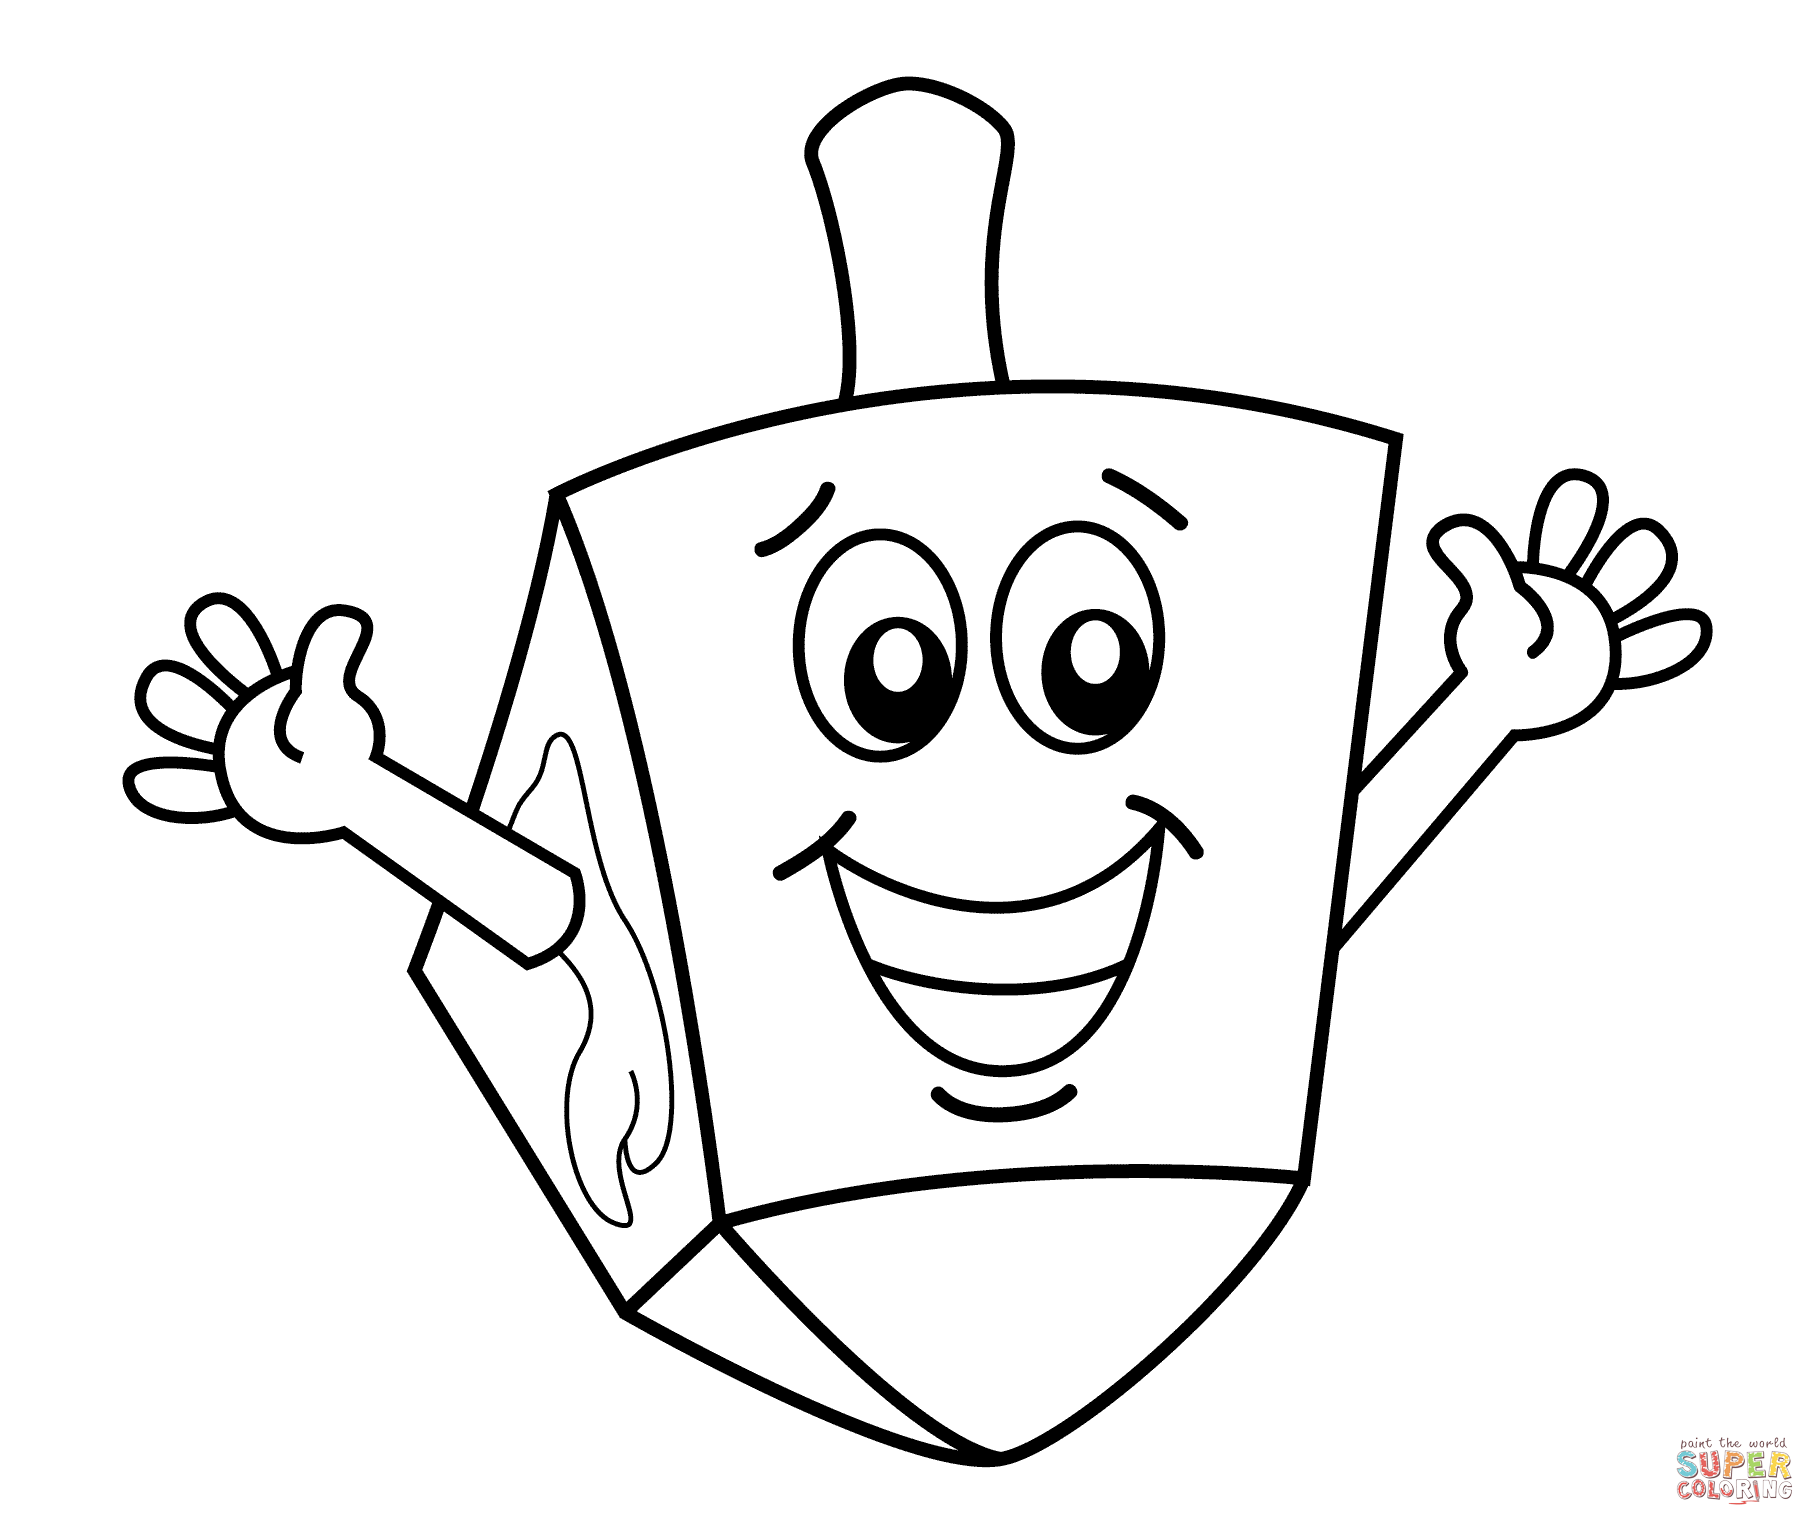 Jewish holidays coloring pages | Free Coloring Pages